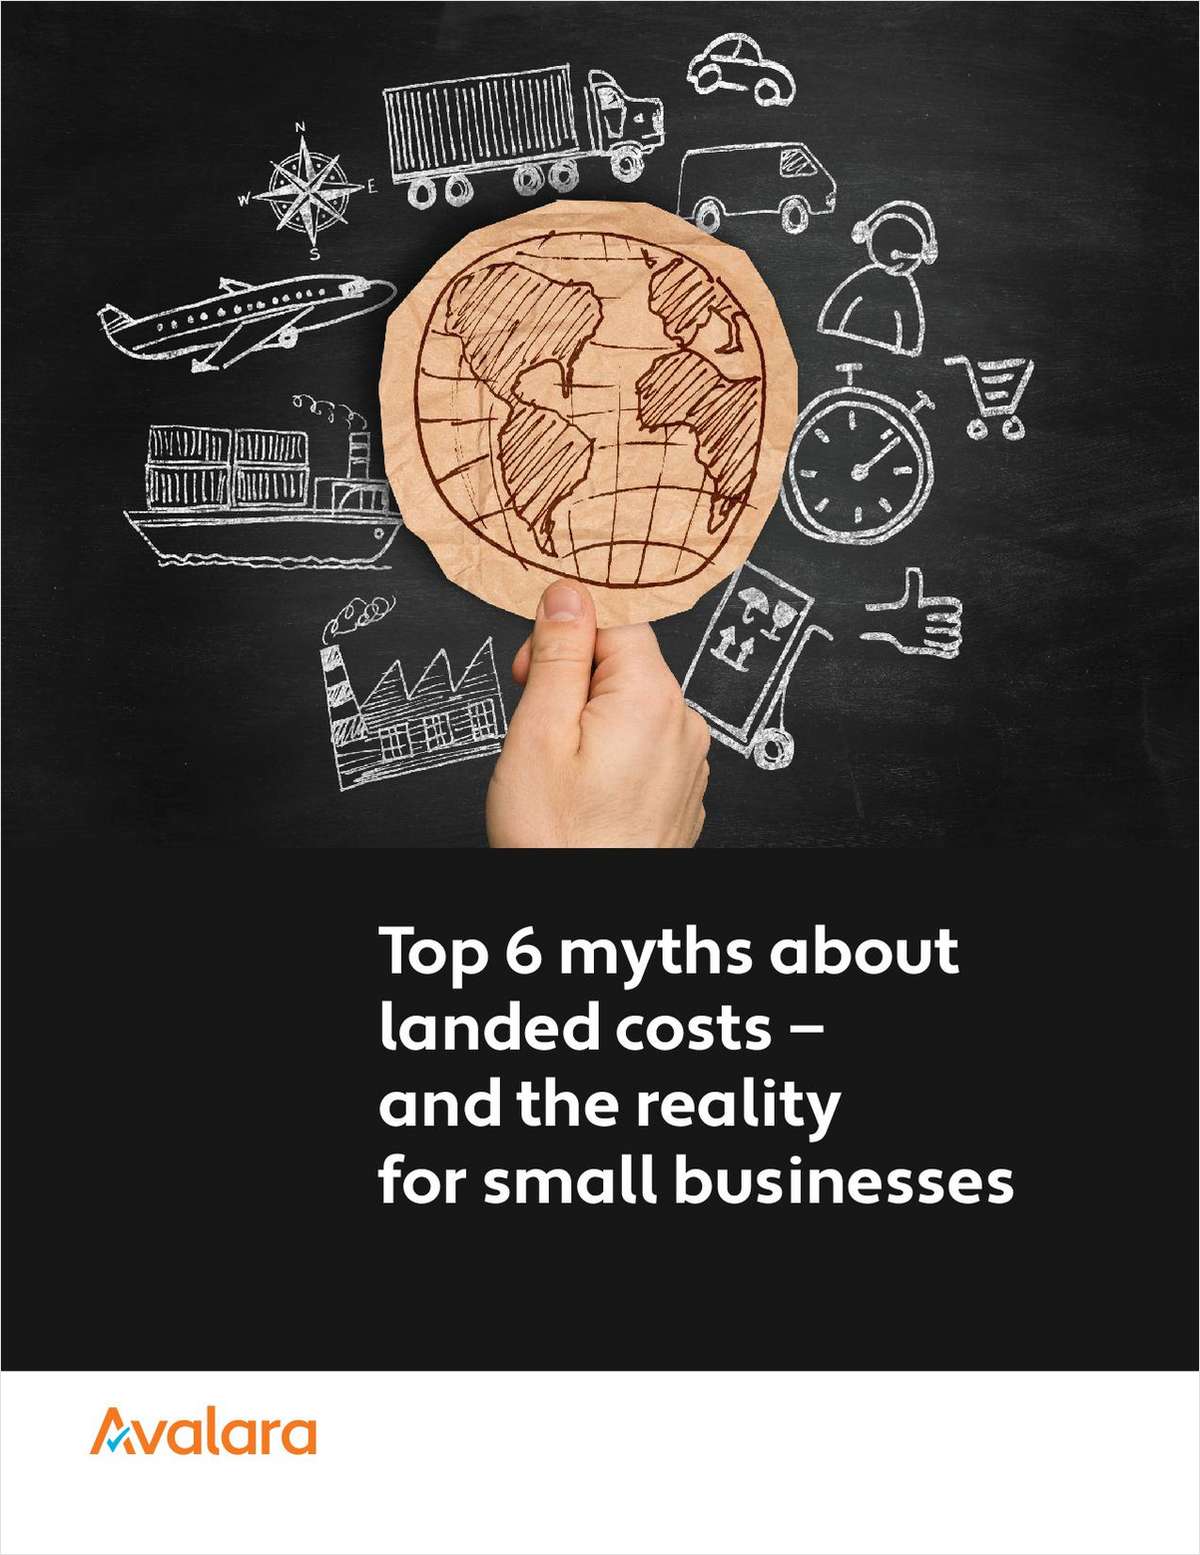 Top 6 Myths About Landed Costs and the Reality for Small Businesses